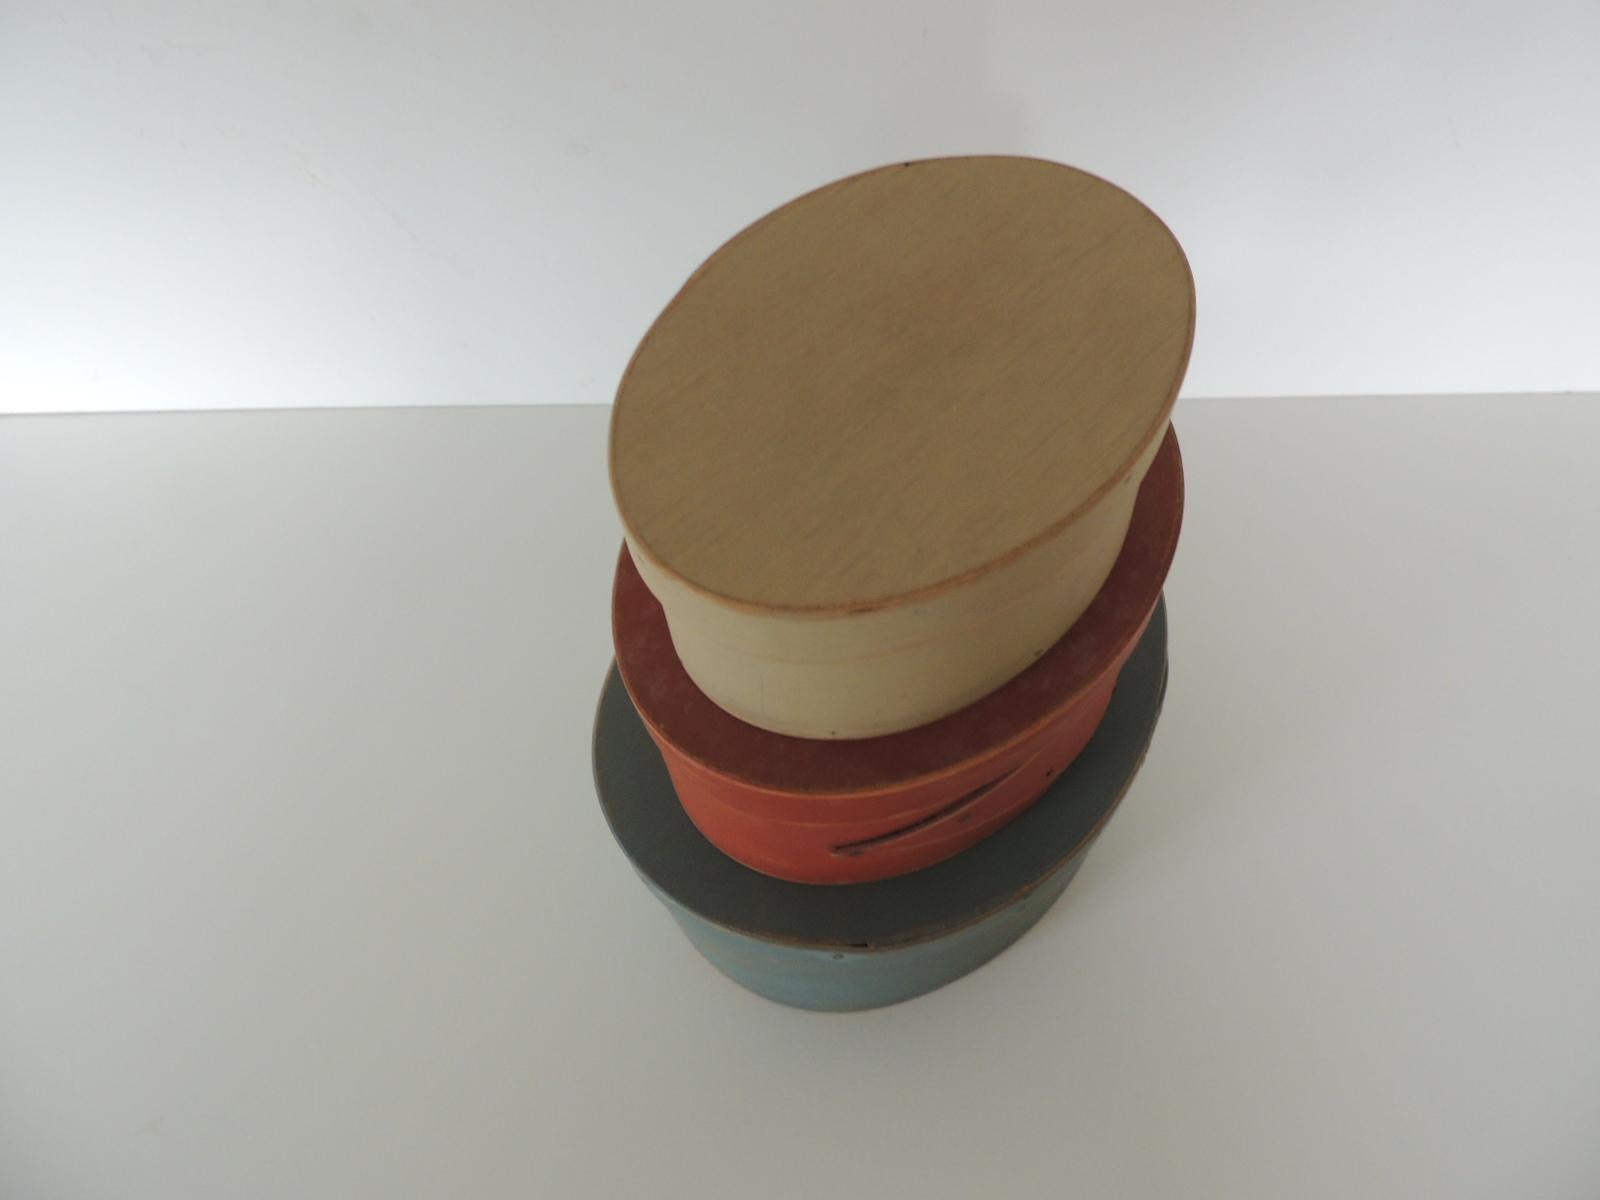 American Set of 3 Red, Blue and Tan Wooden Shaker Boxes